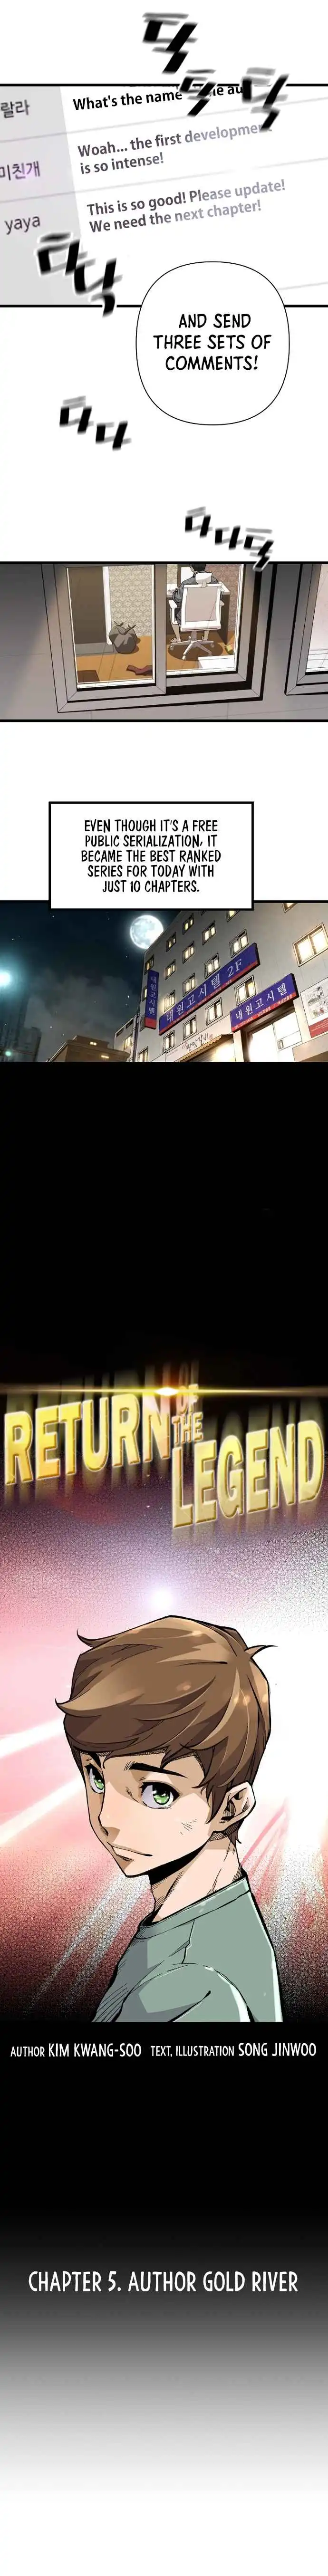 Return of the Legend Chapter 5